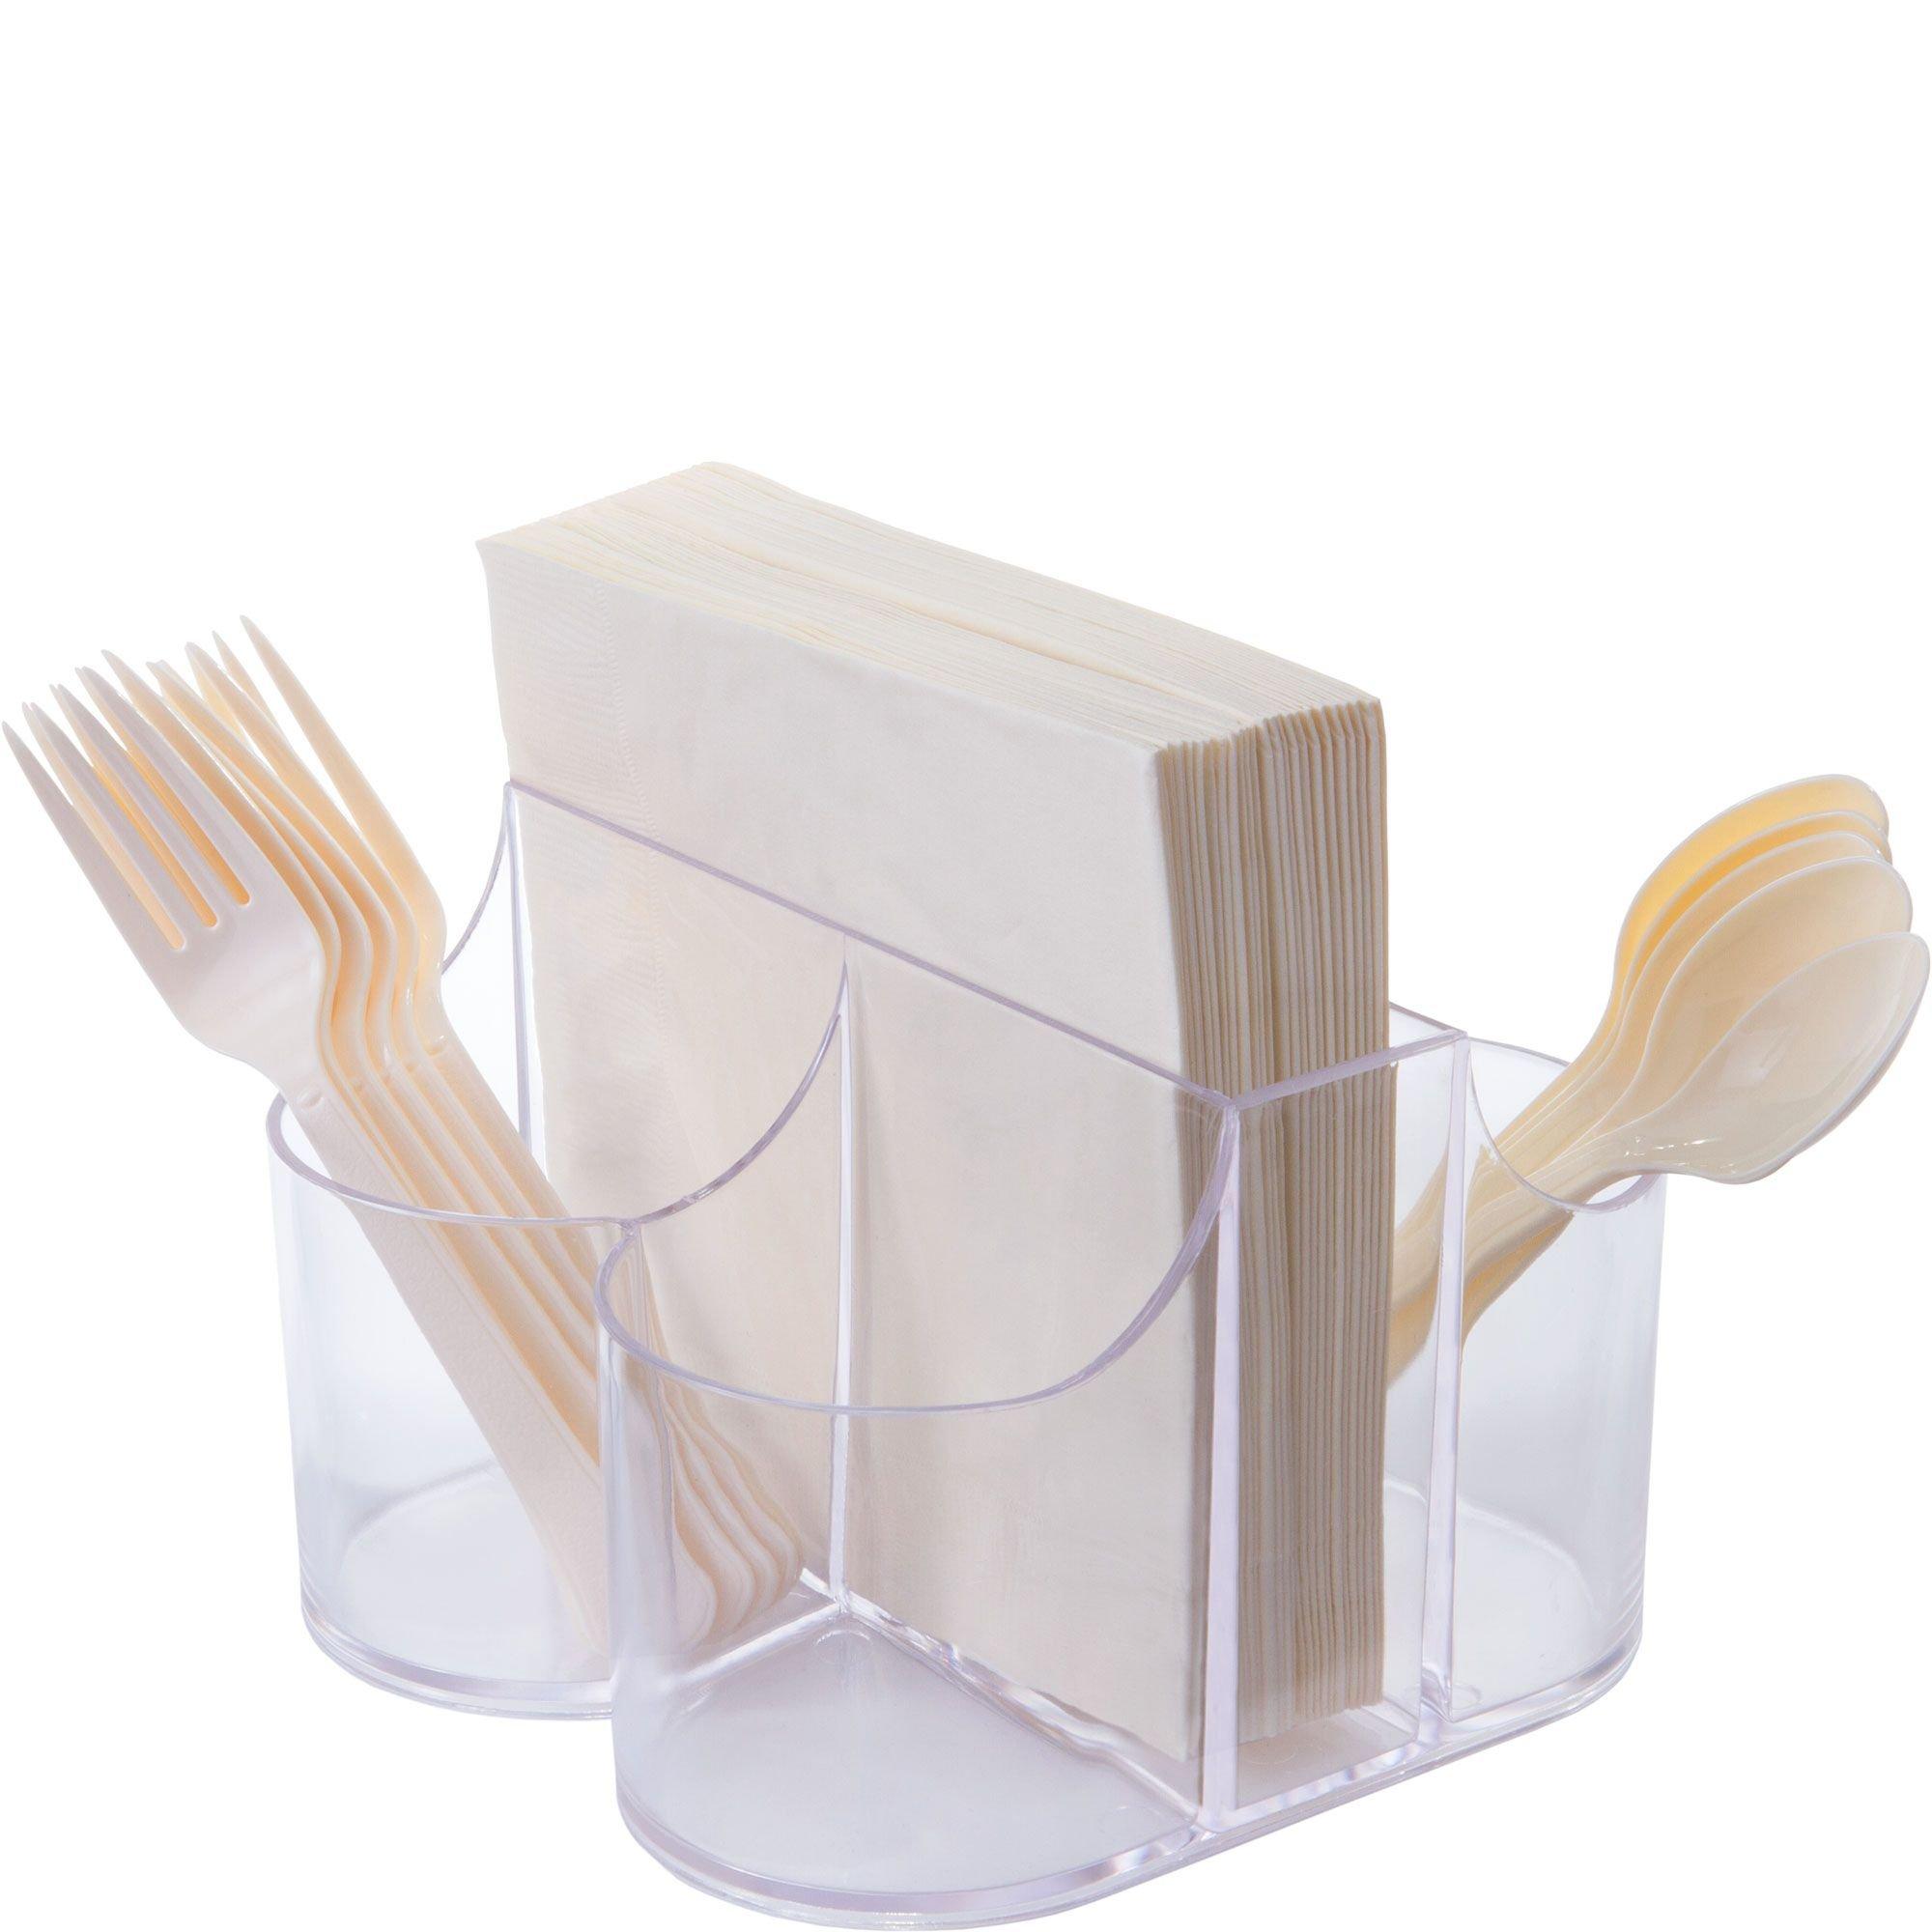 Dixie Cutlery Keeper Tray w/Clear Plastic Utensils: 60 Forks, 60